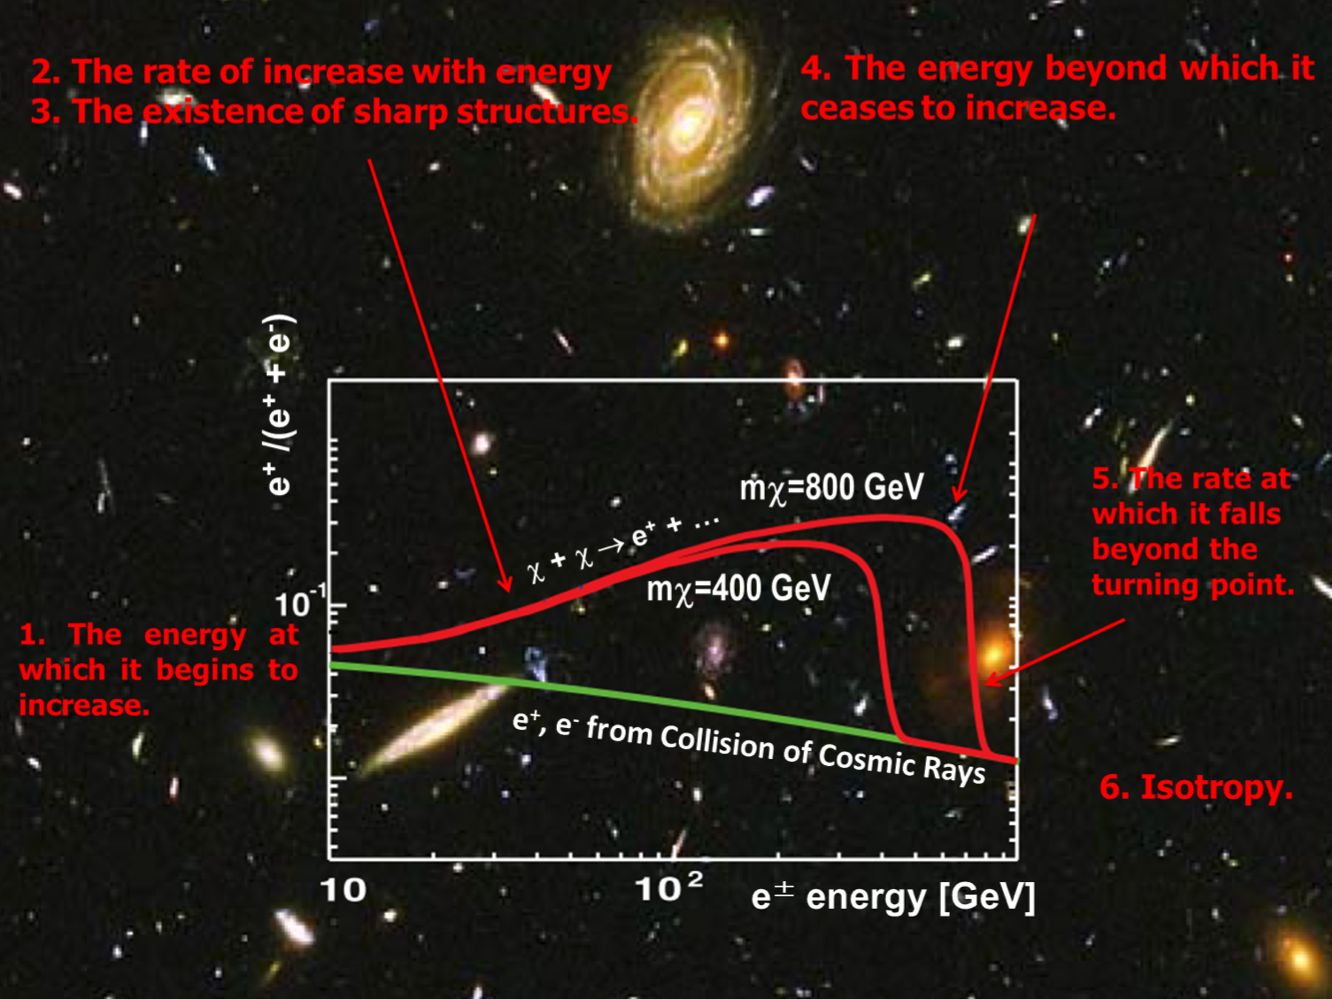 picture 2014-3 - positron fraction in cosmic rays